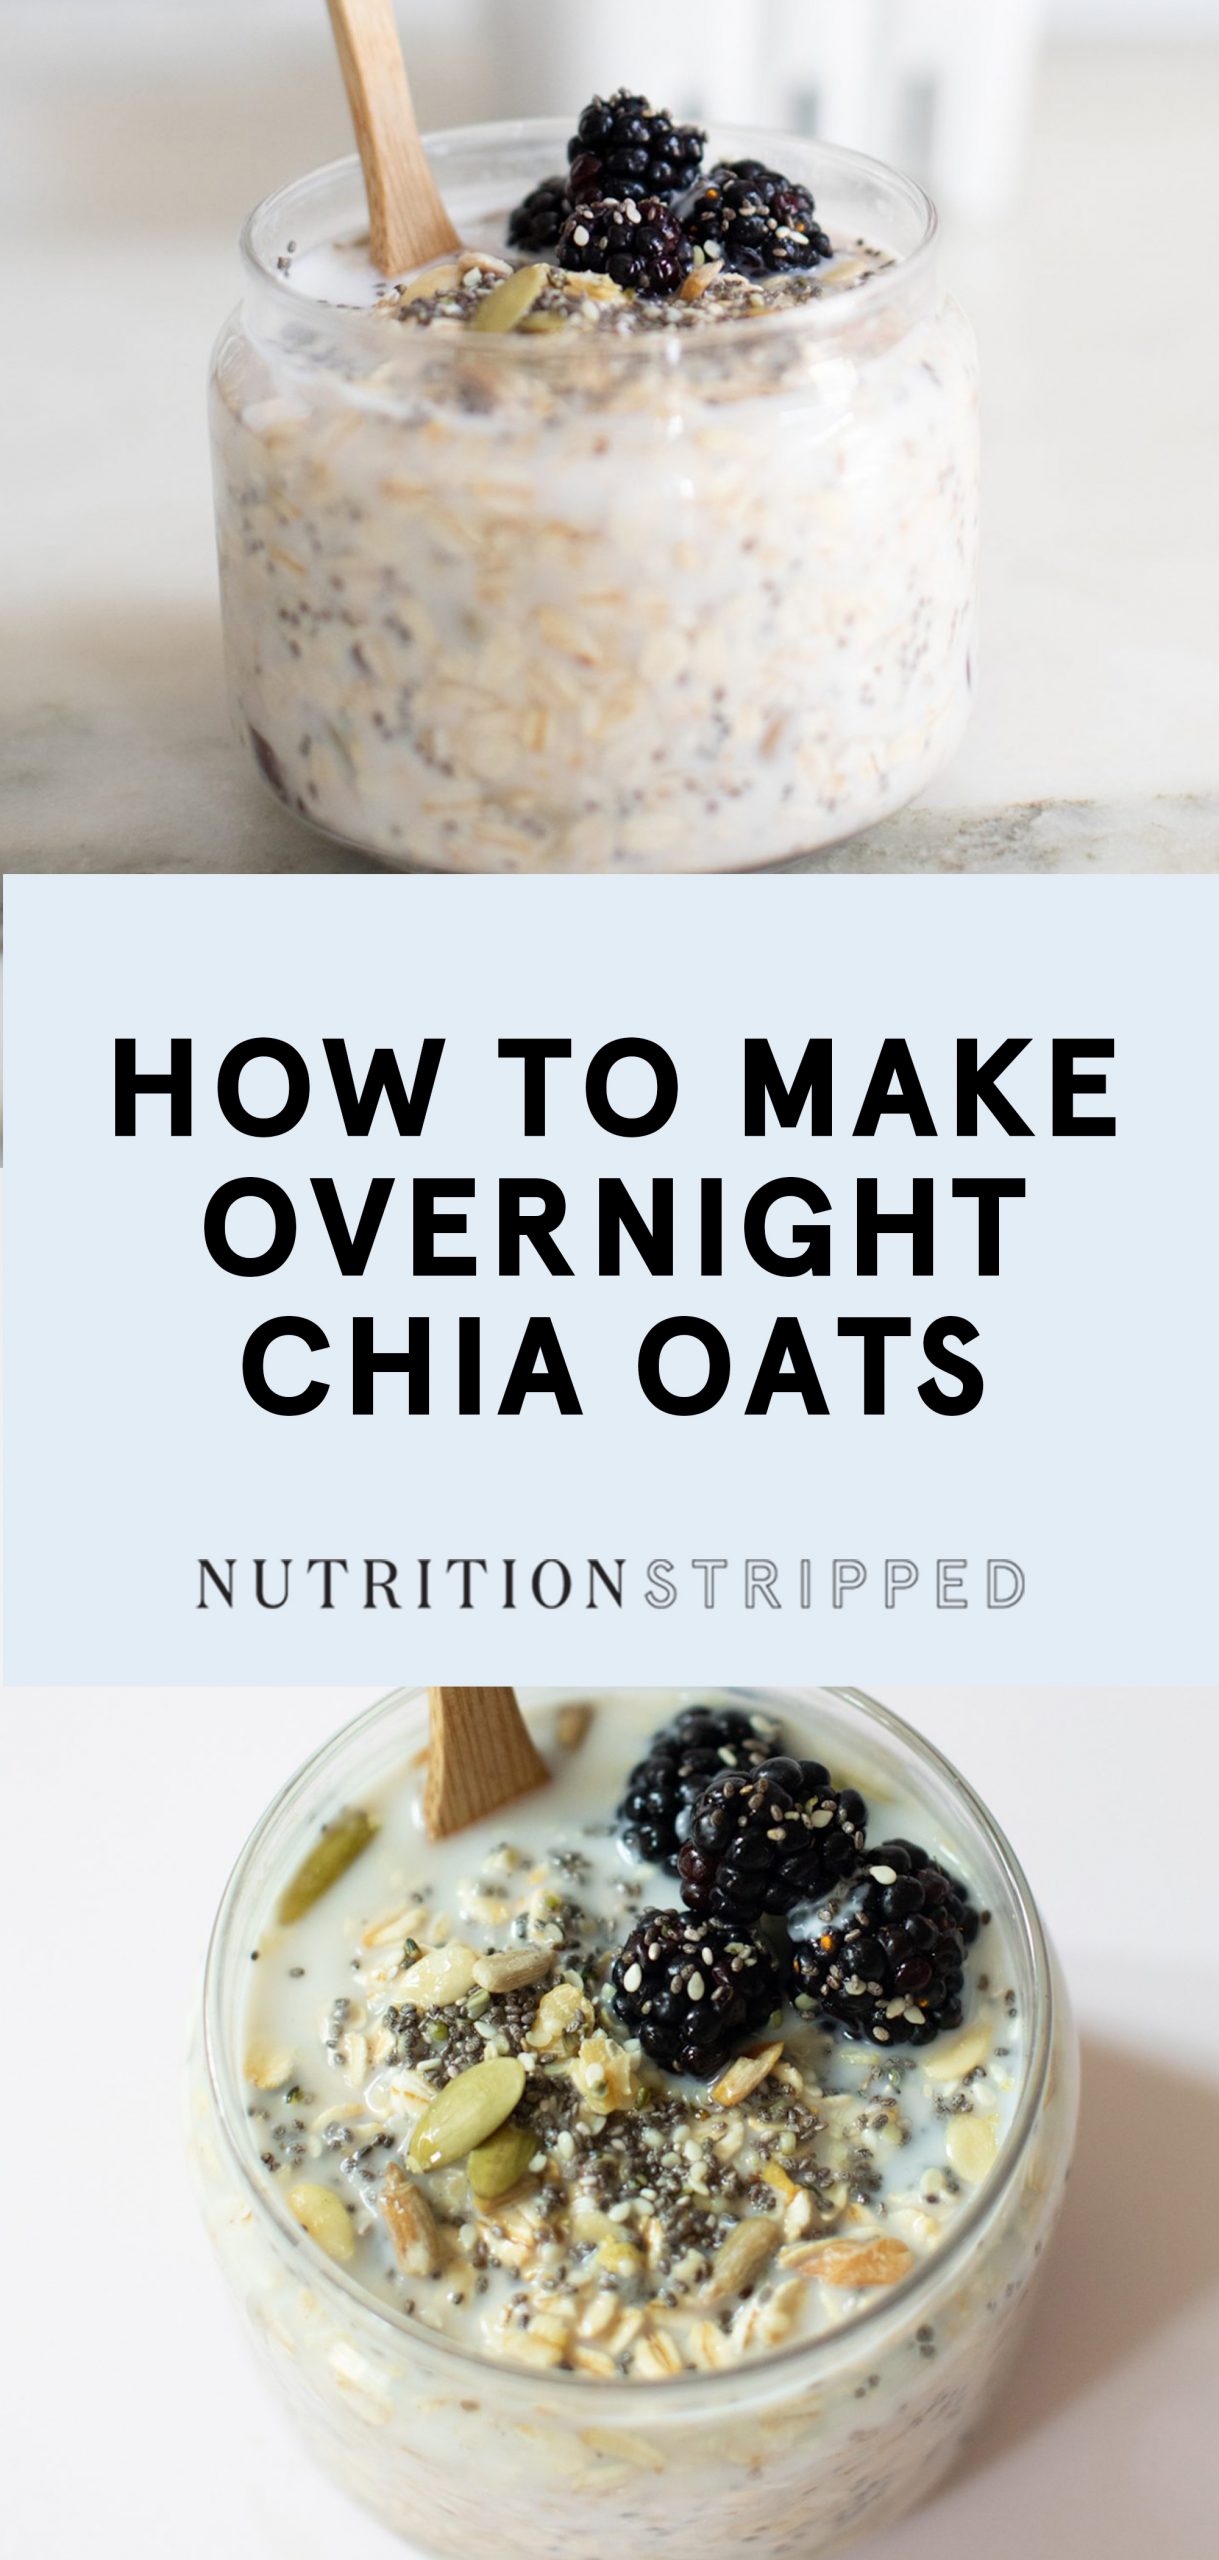 How to Make Overnight Chia Oats | Nutrition Stripped